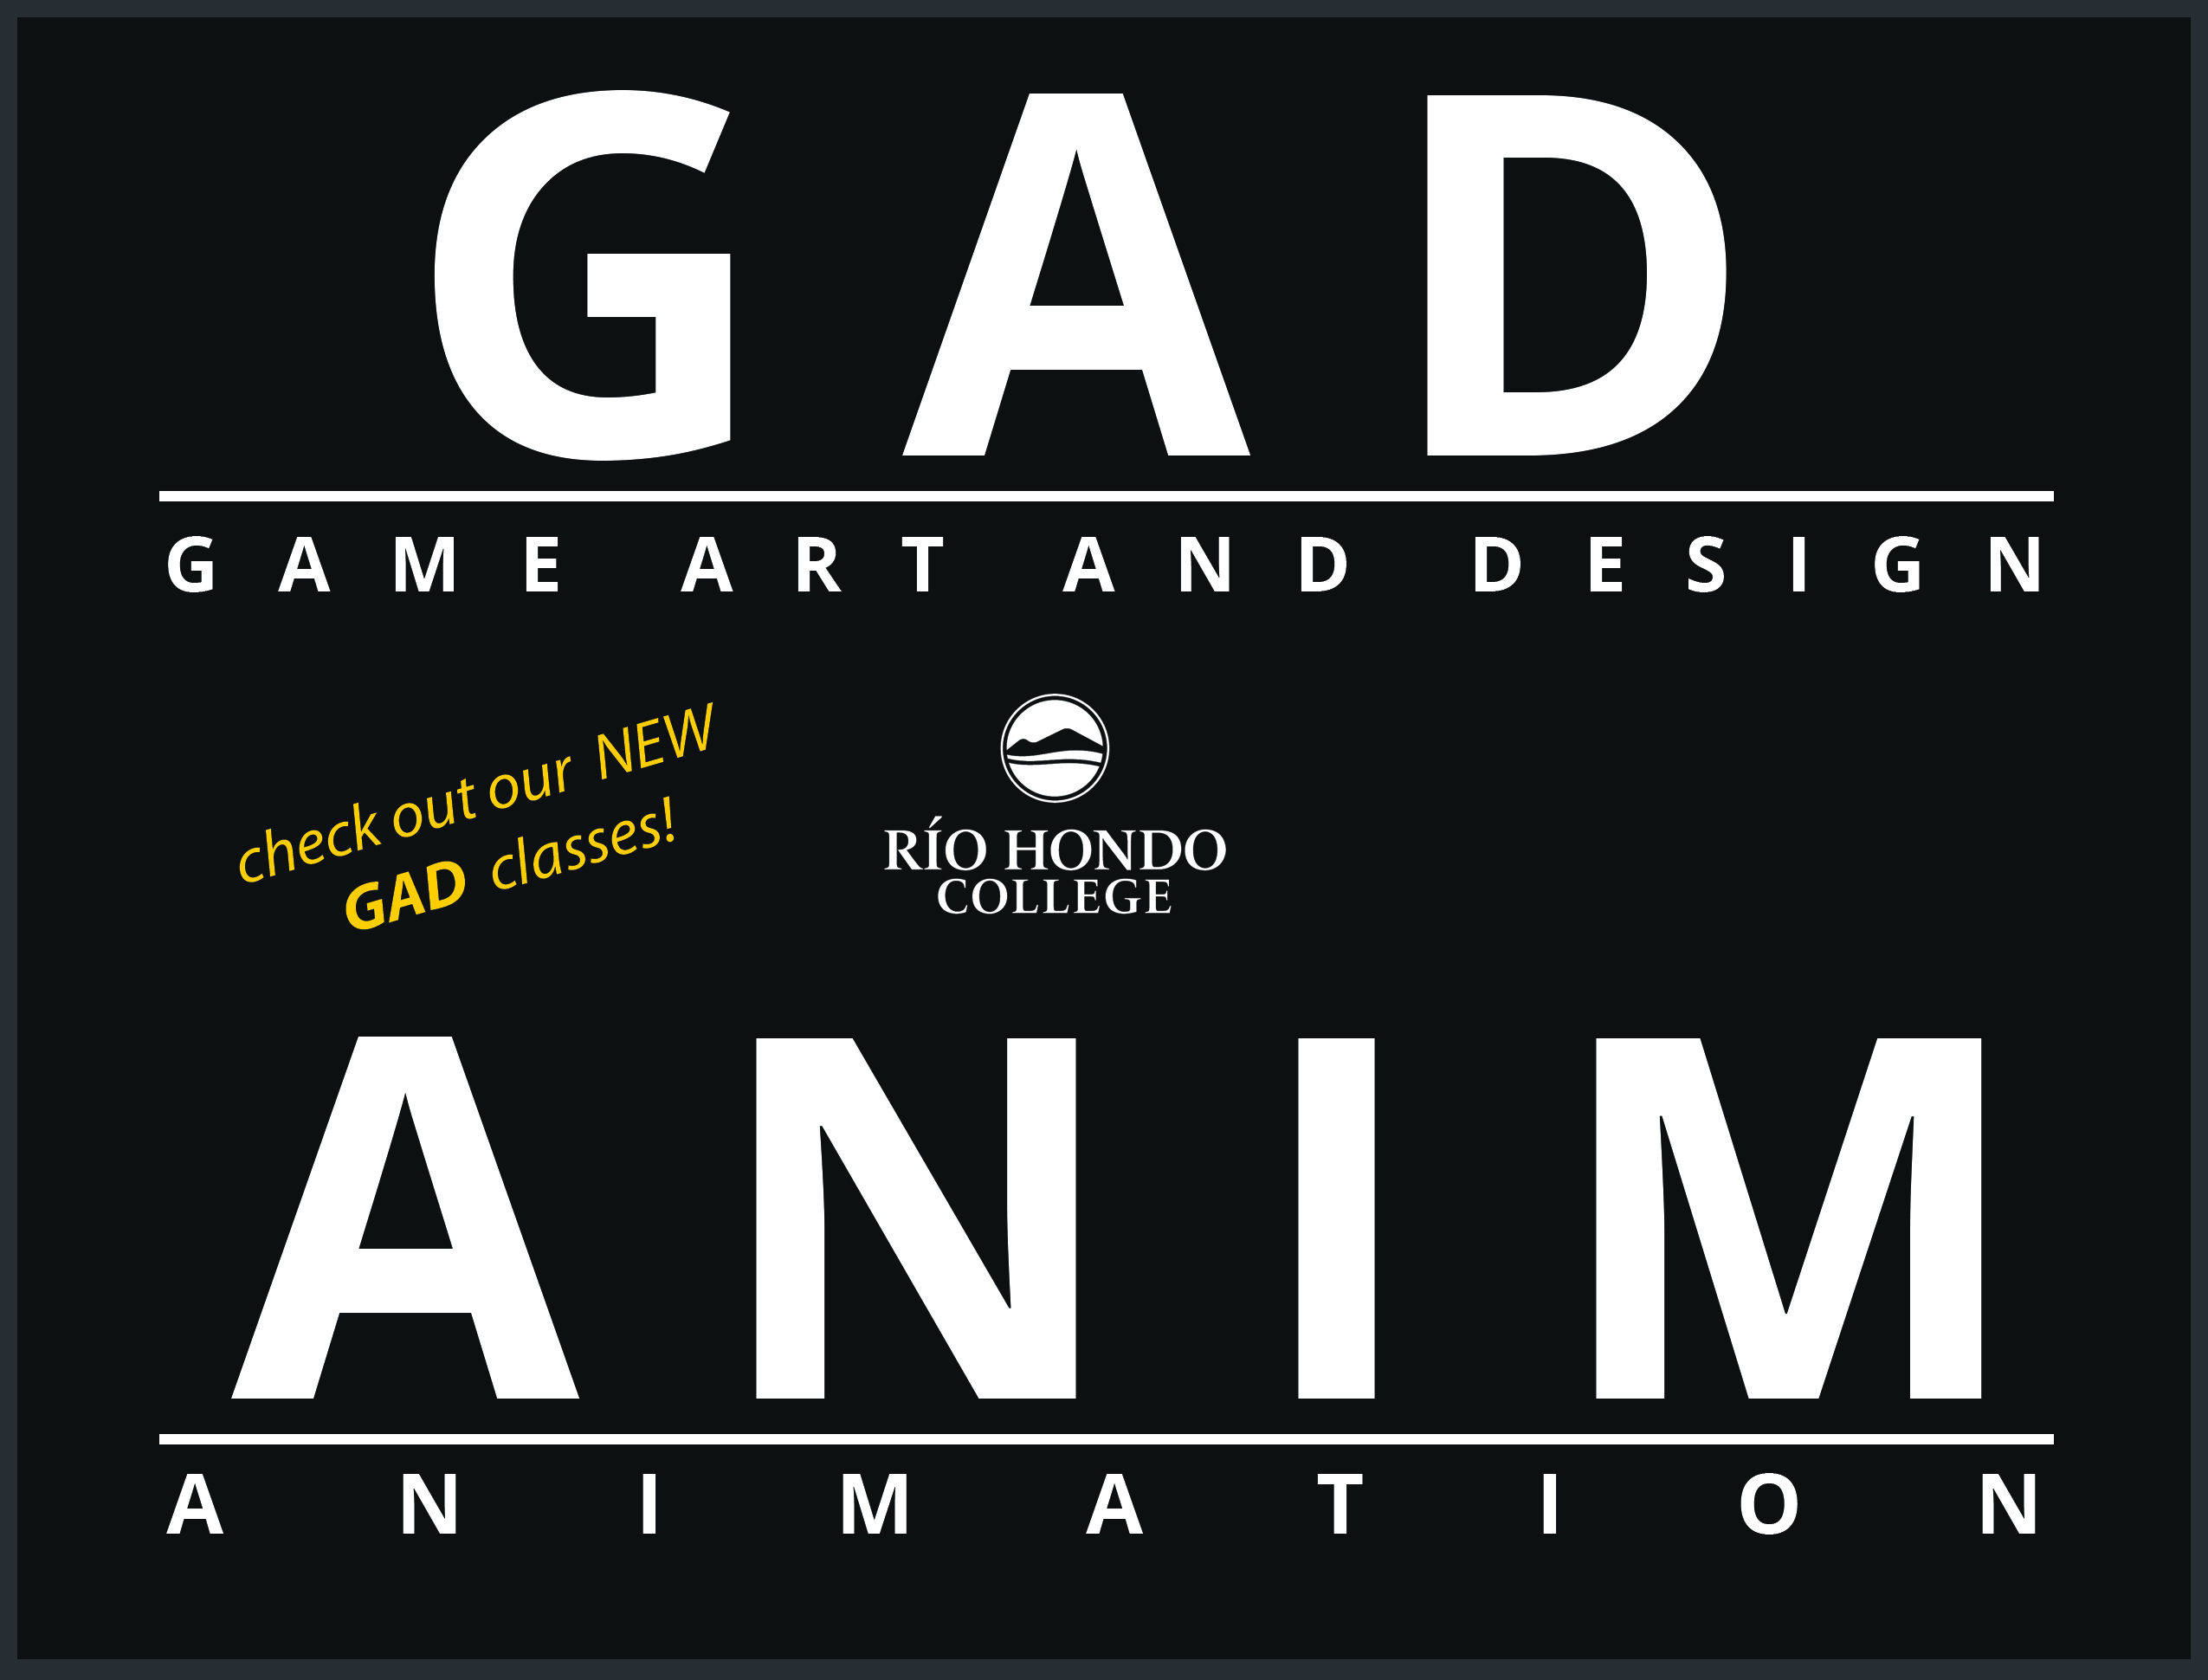 Game Art and Design banner